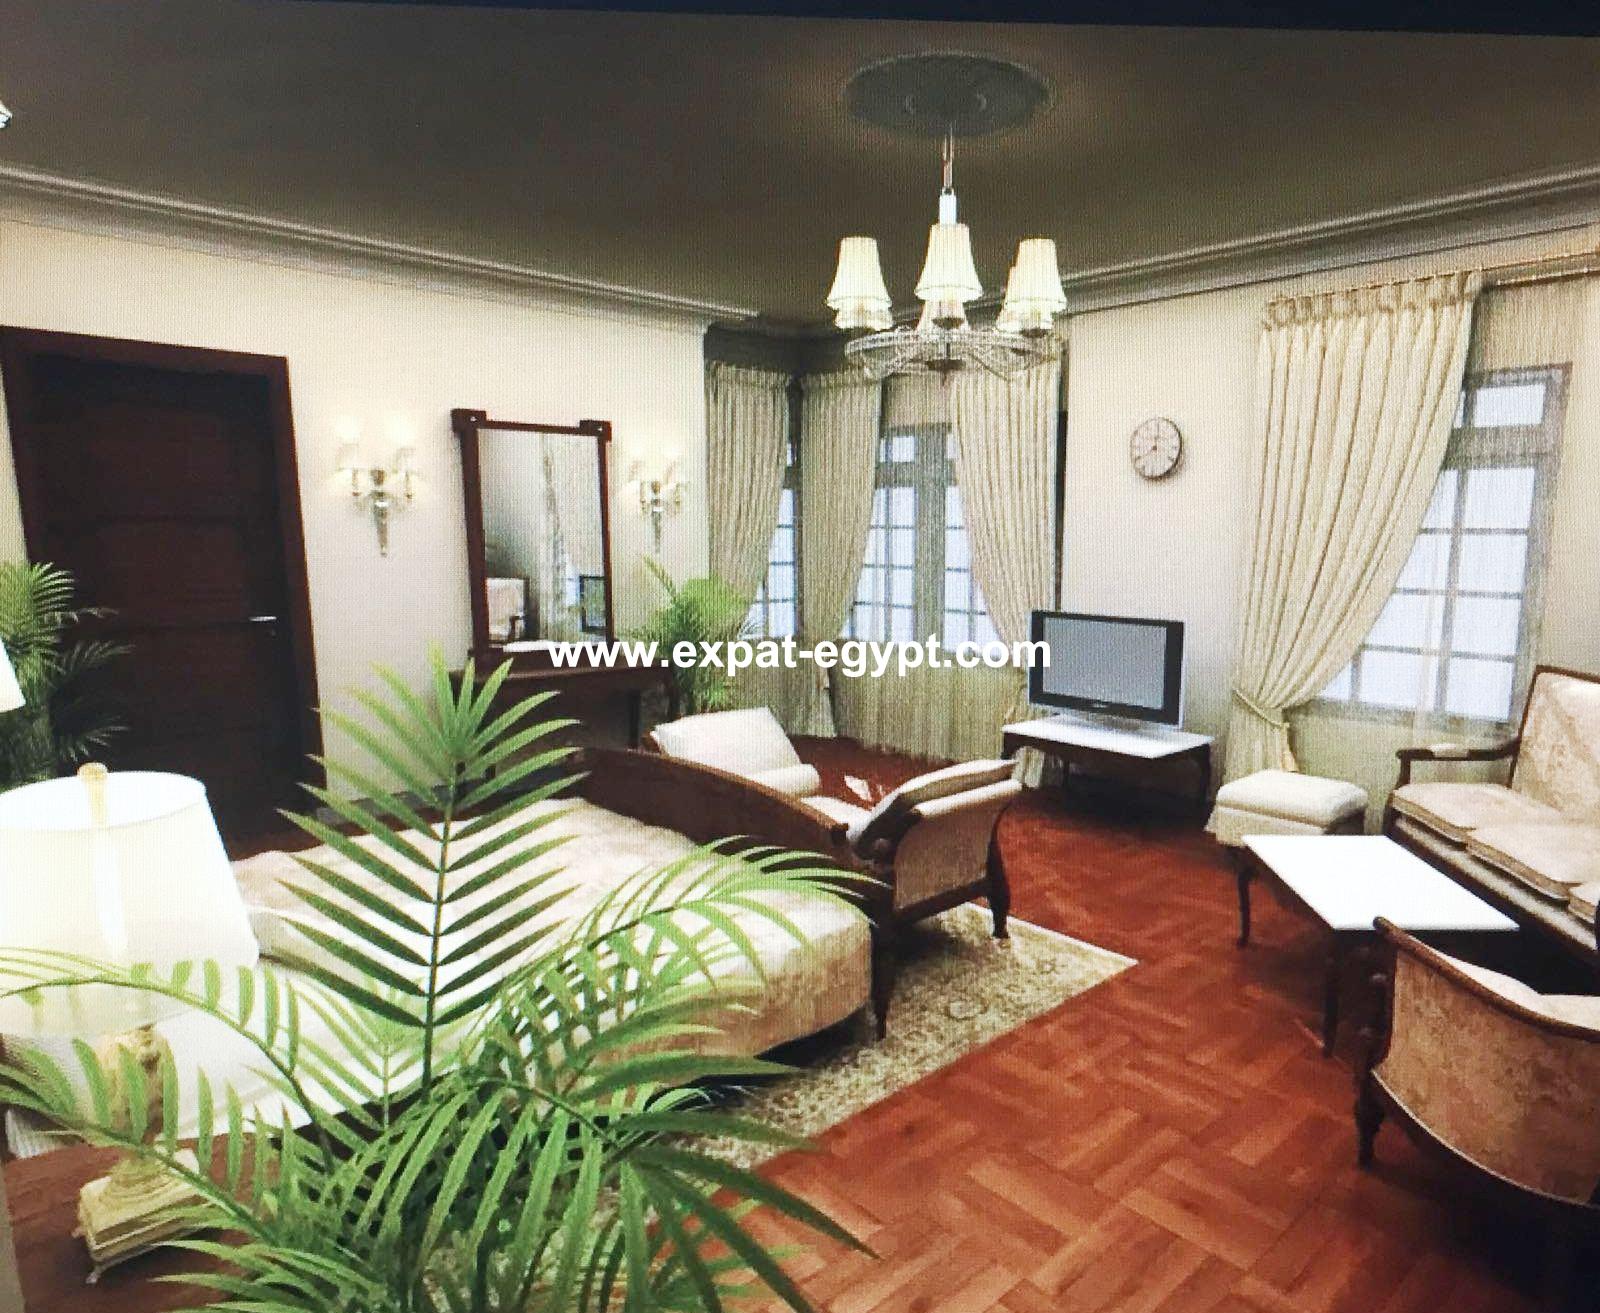 Apartment for Sale or Rent in El Dokki, Giza